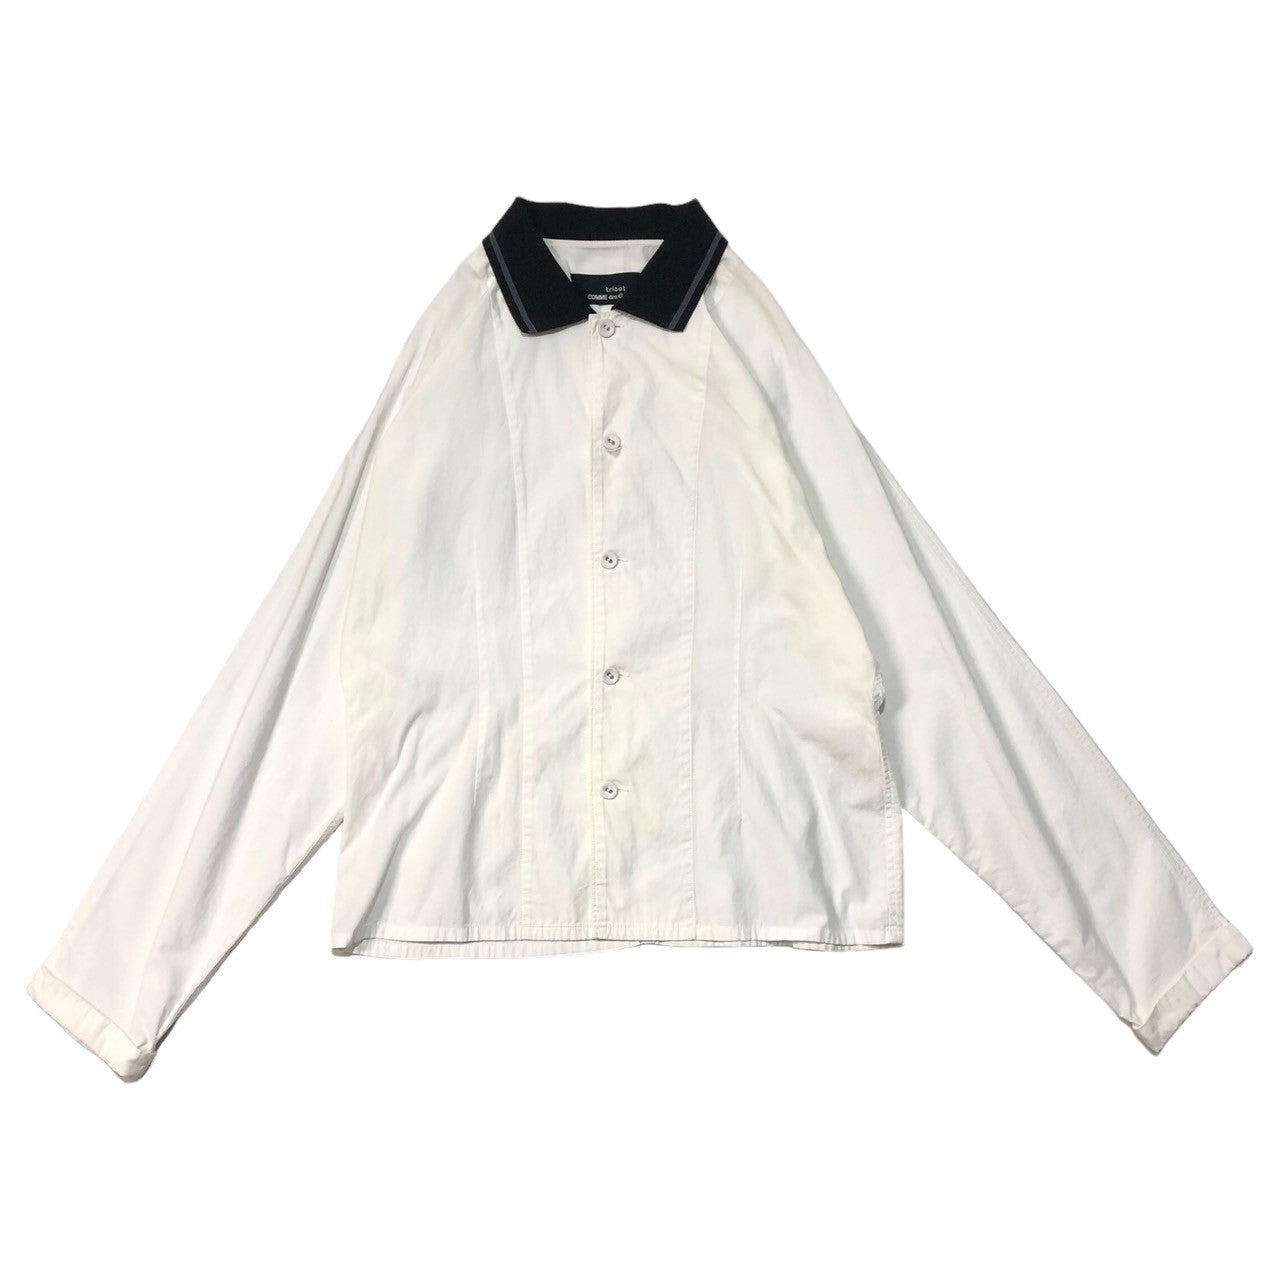 tricot COMME des GARCONS(トリココムデギャルソン) 90's Dolman sleeve shirt with switched collar 襟切り替えドルマンスリーブシャツ ホワイト